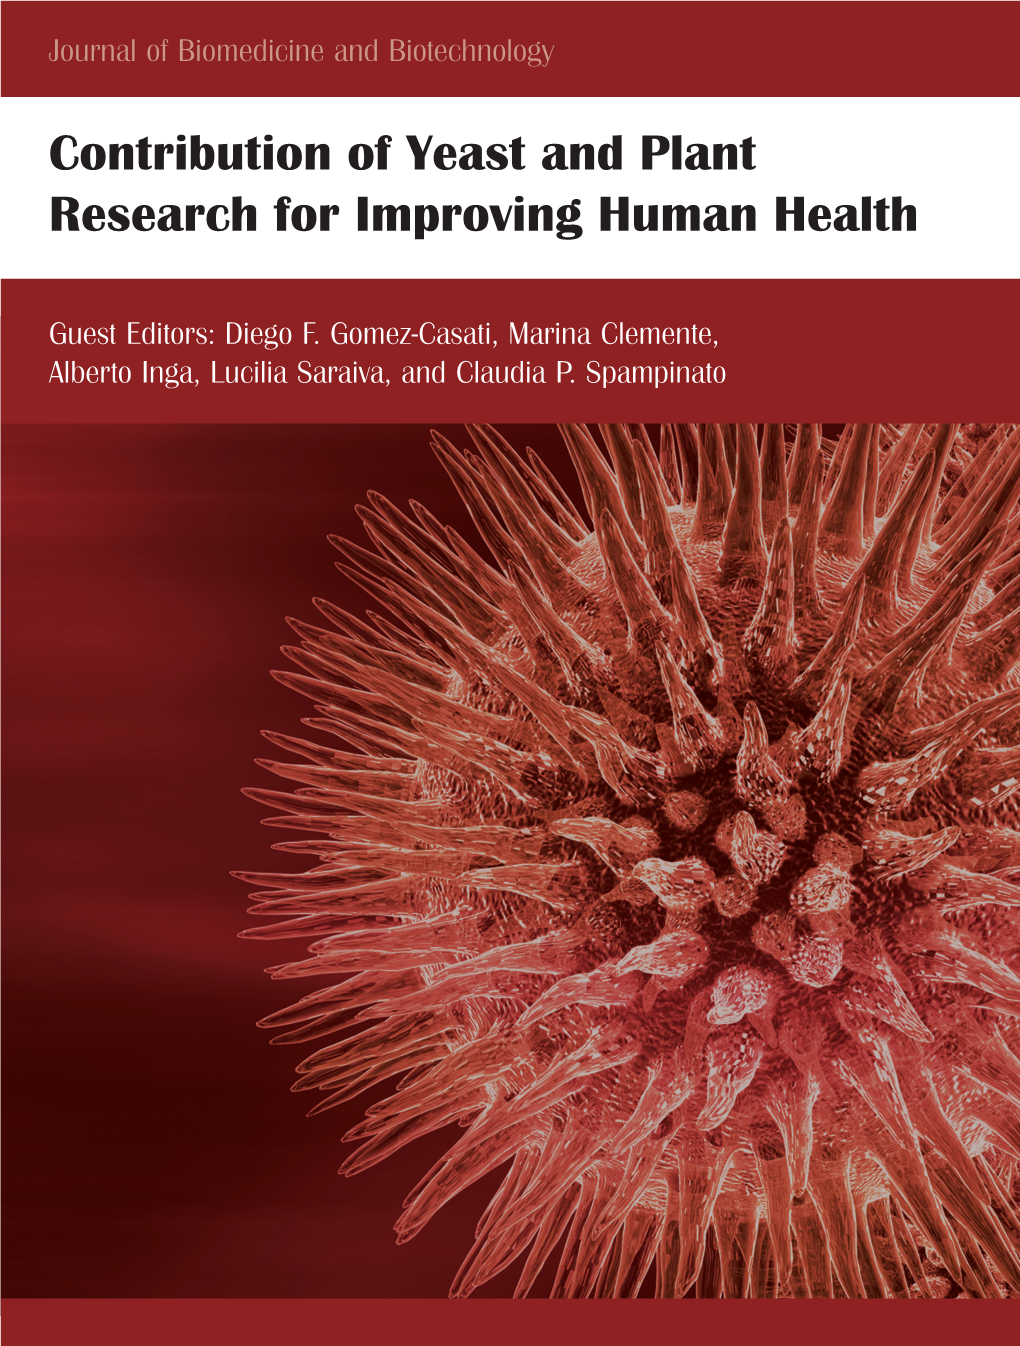 Contribution of Yeast and Plant Research for Improving Human Health